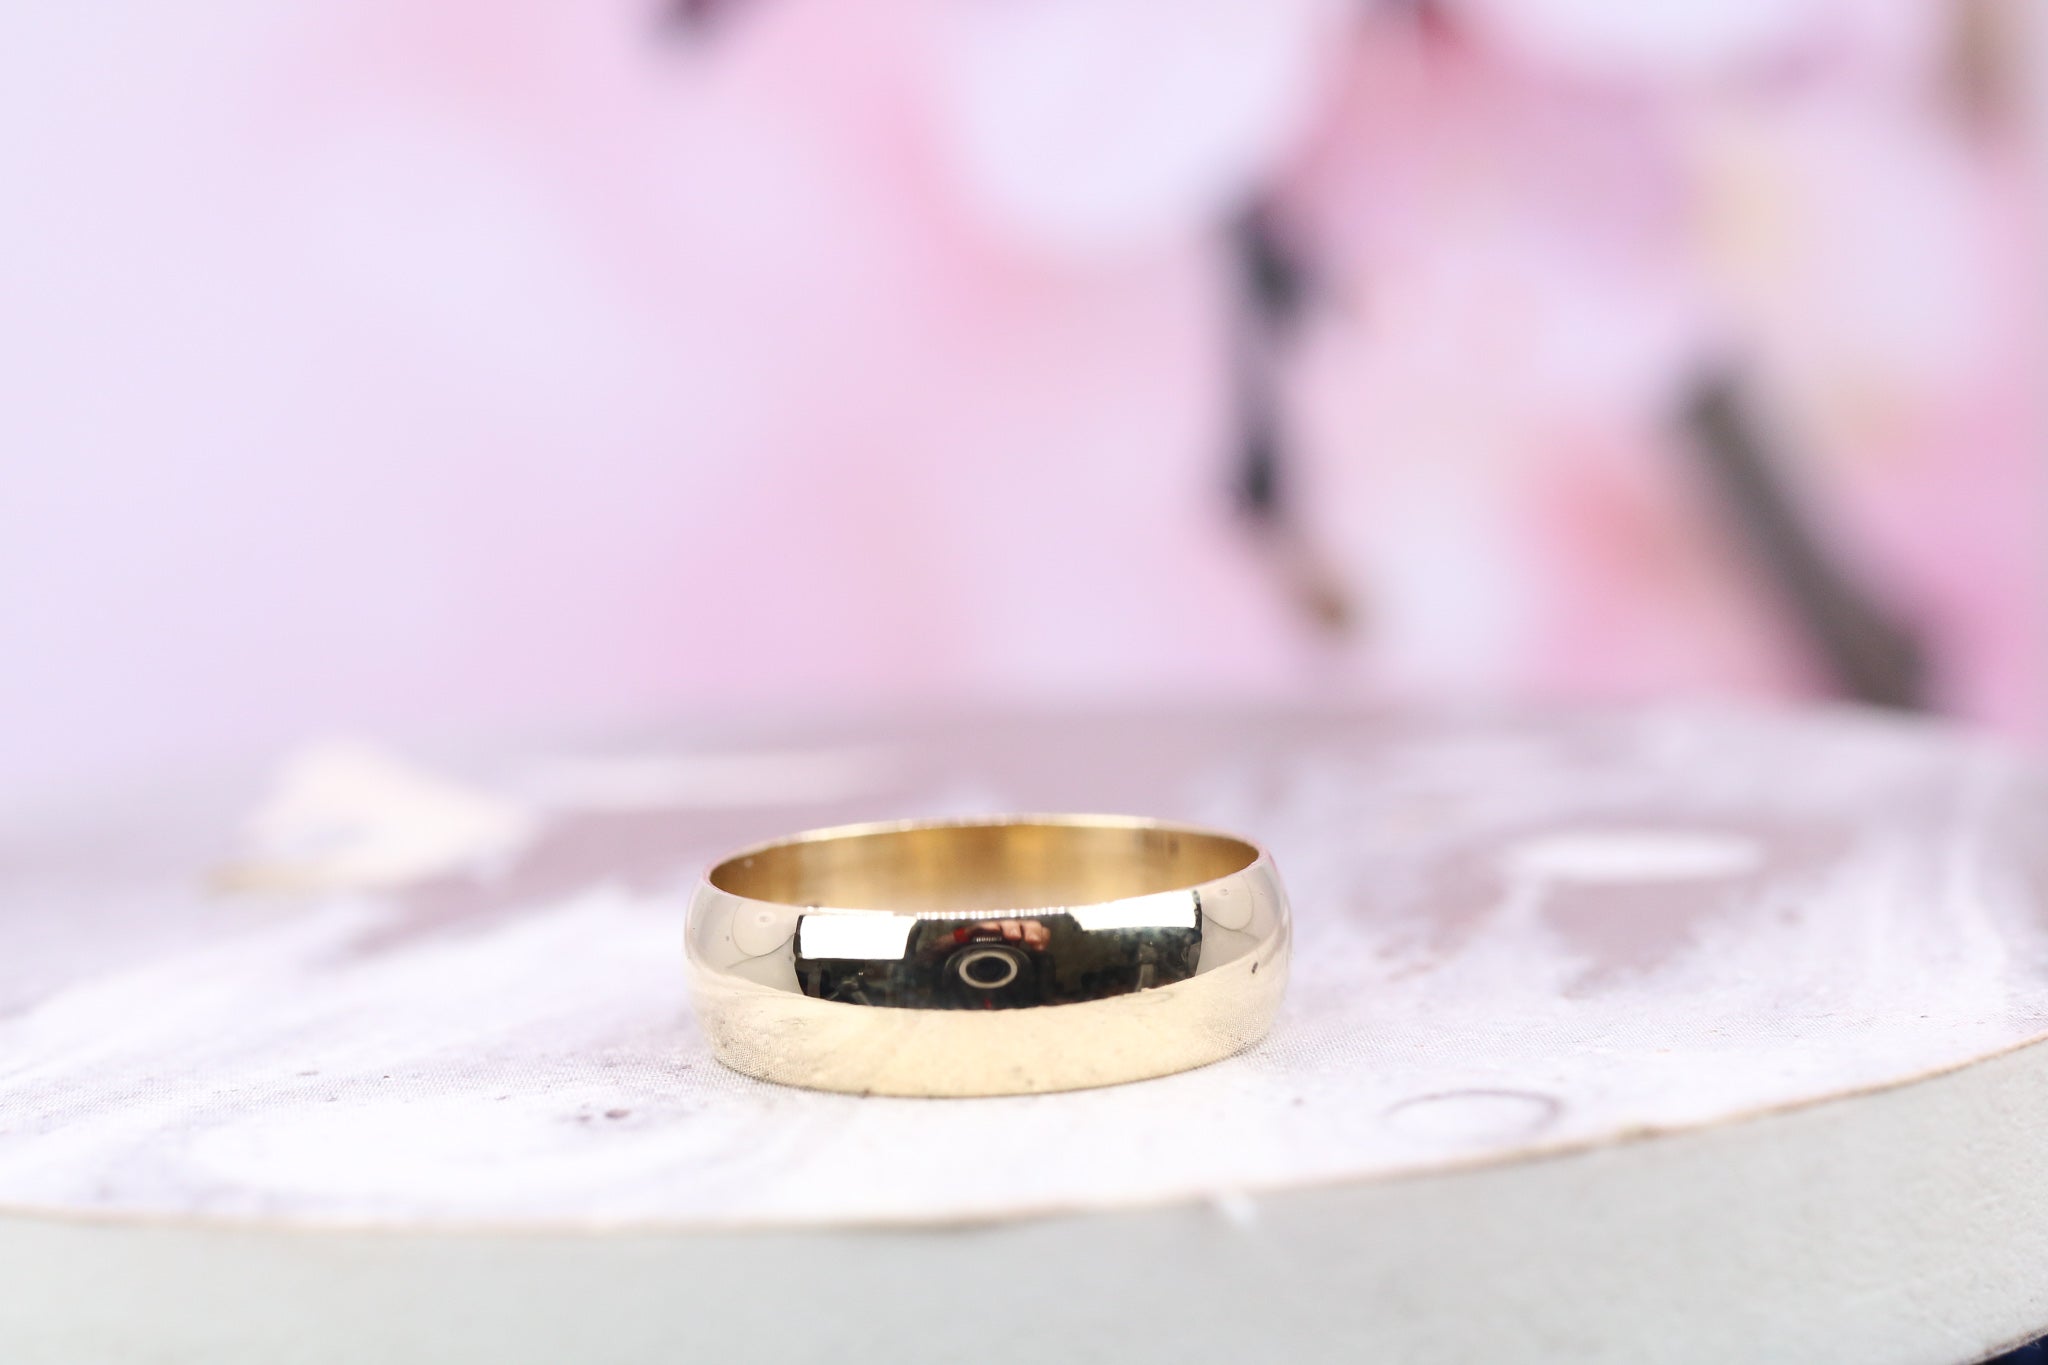 9ct Yellow Gold Wedding Band - HJ2741 - Hallmark Jewellers Formby & The Jewellers Bench Widnes